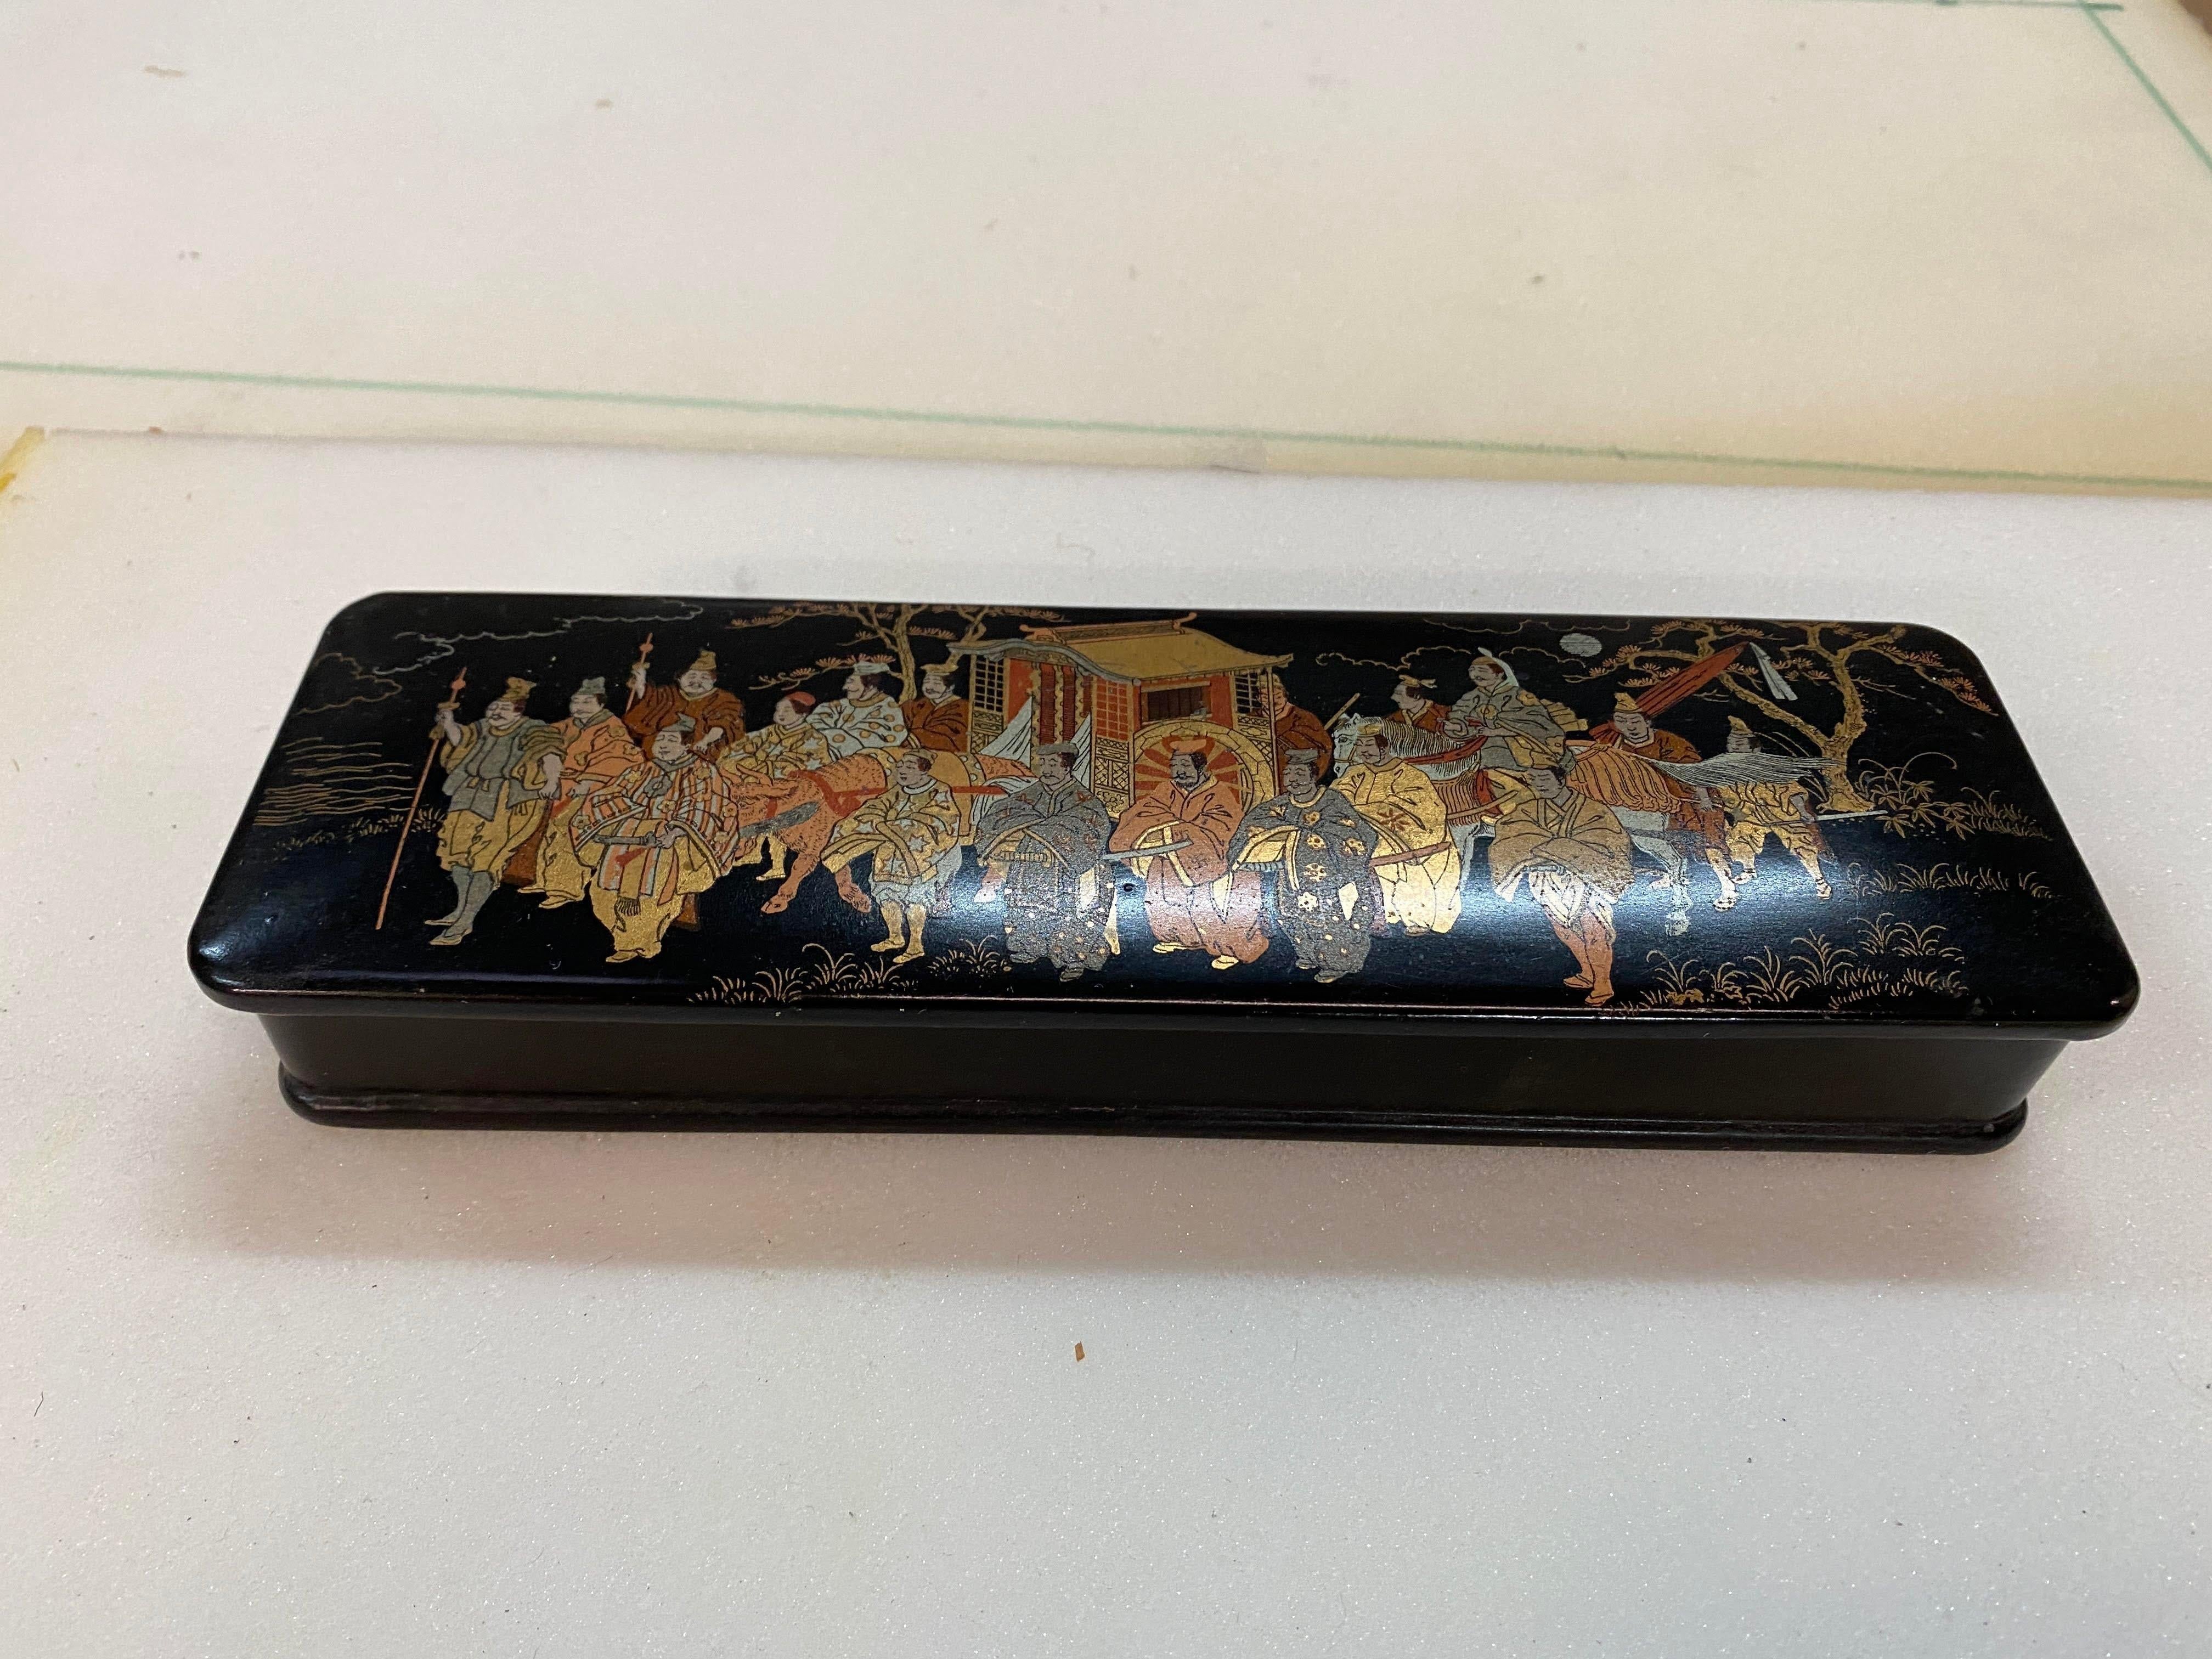 Vintage Japanese Black, Gold and Red Lacquer Document Fubako Box In Good Condition For Sale In Sheridan, CO